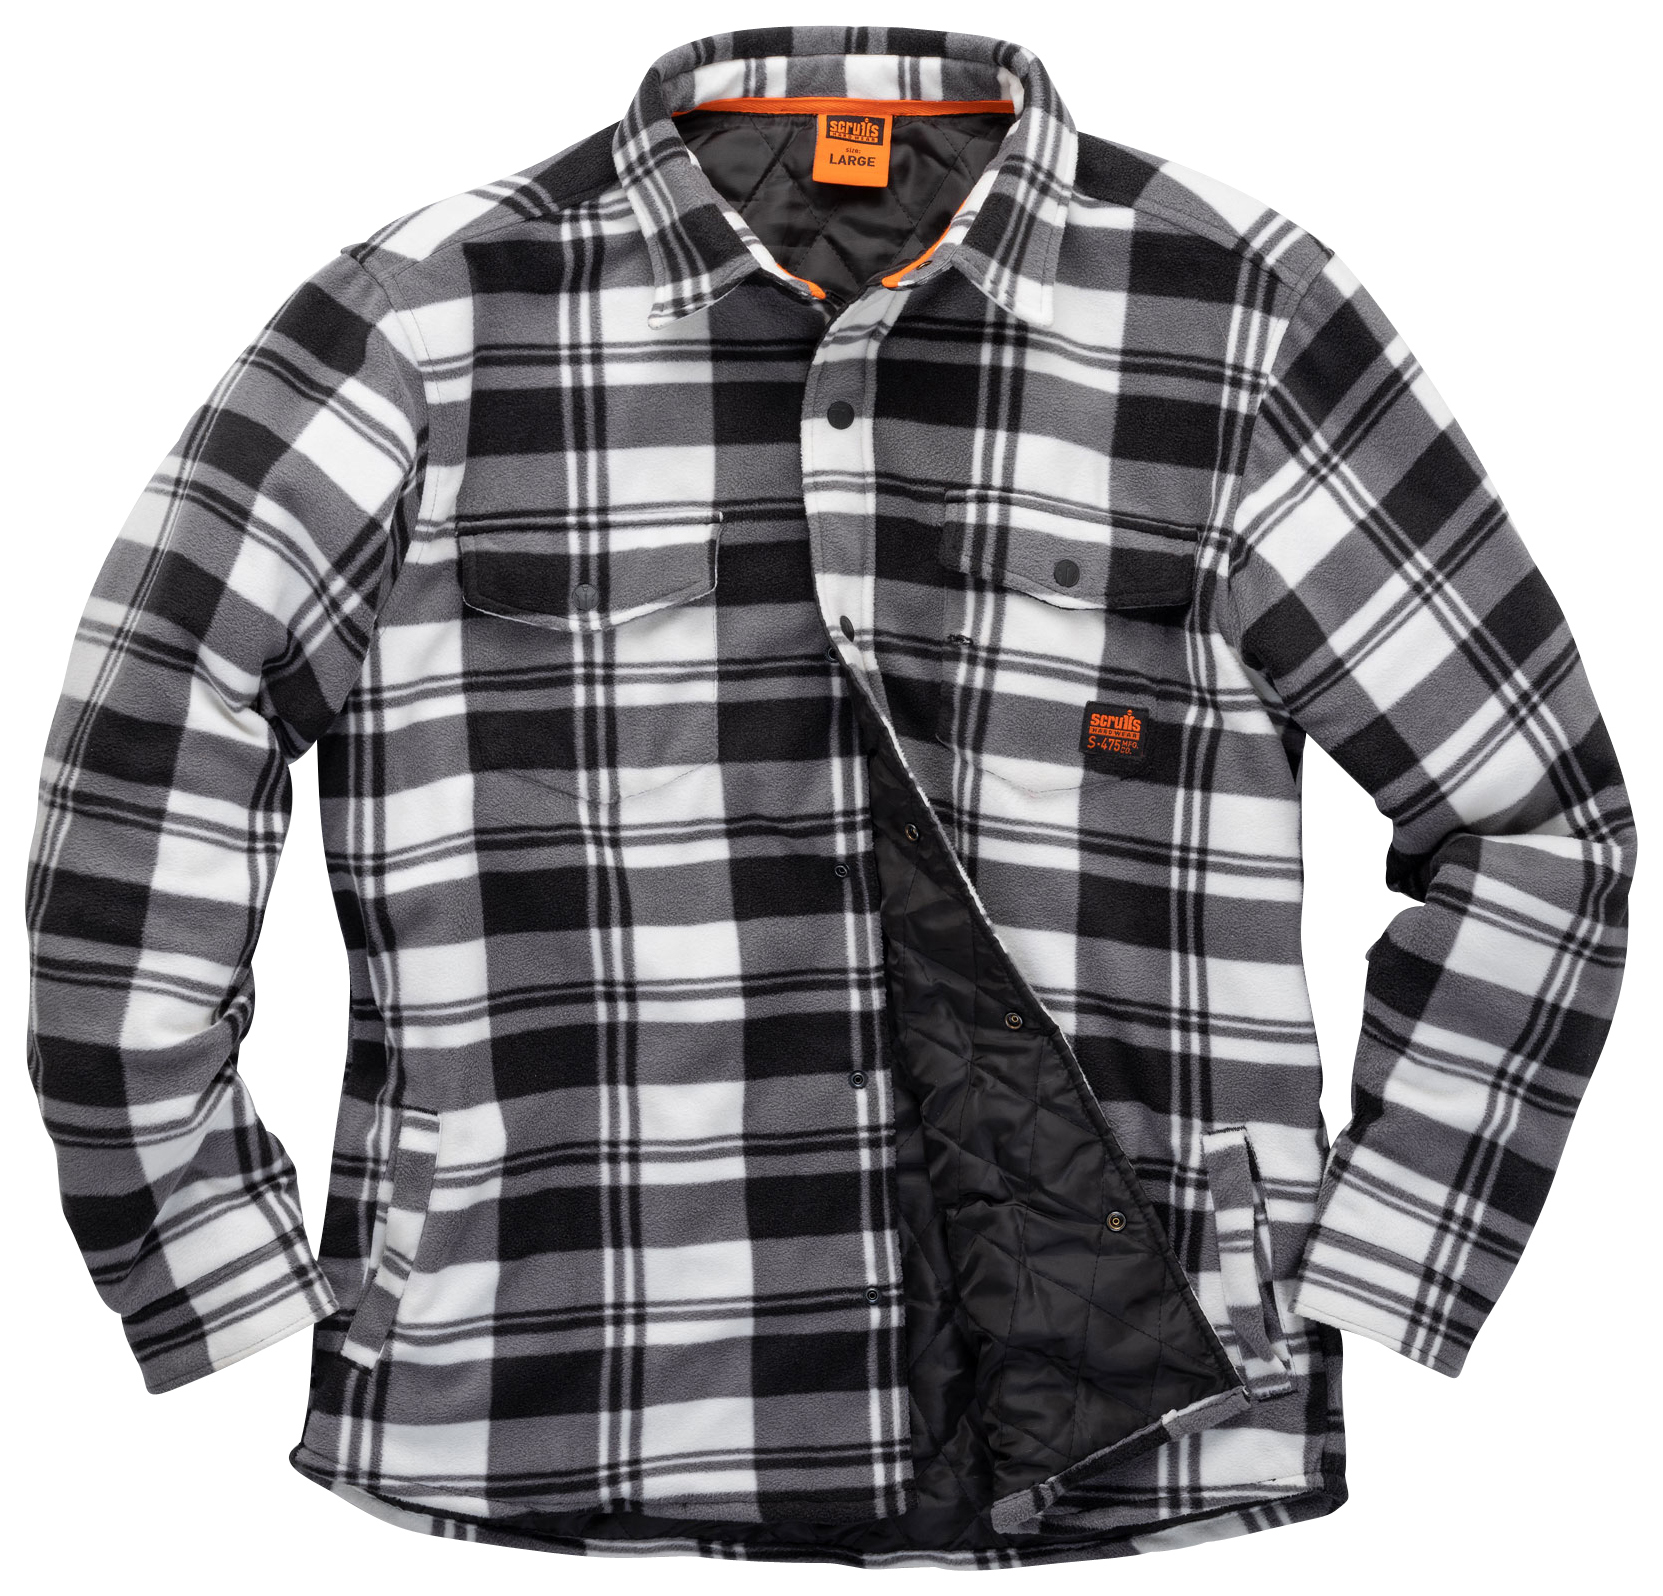 Image of Scruffs Worker Padded Checked Shirt, in Black and White Quick-Drying, Size: XL